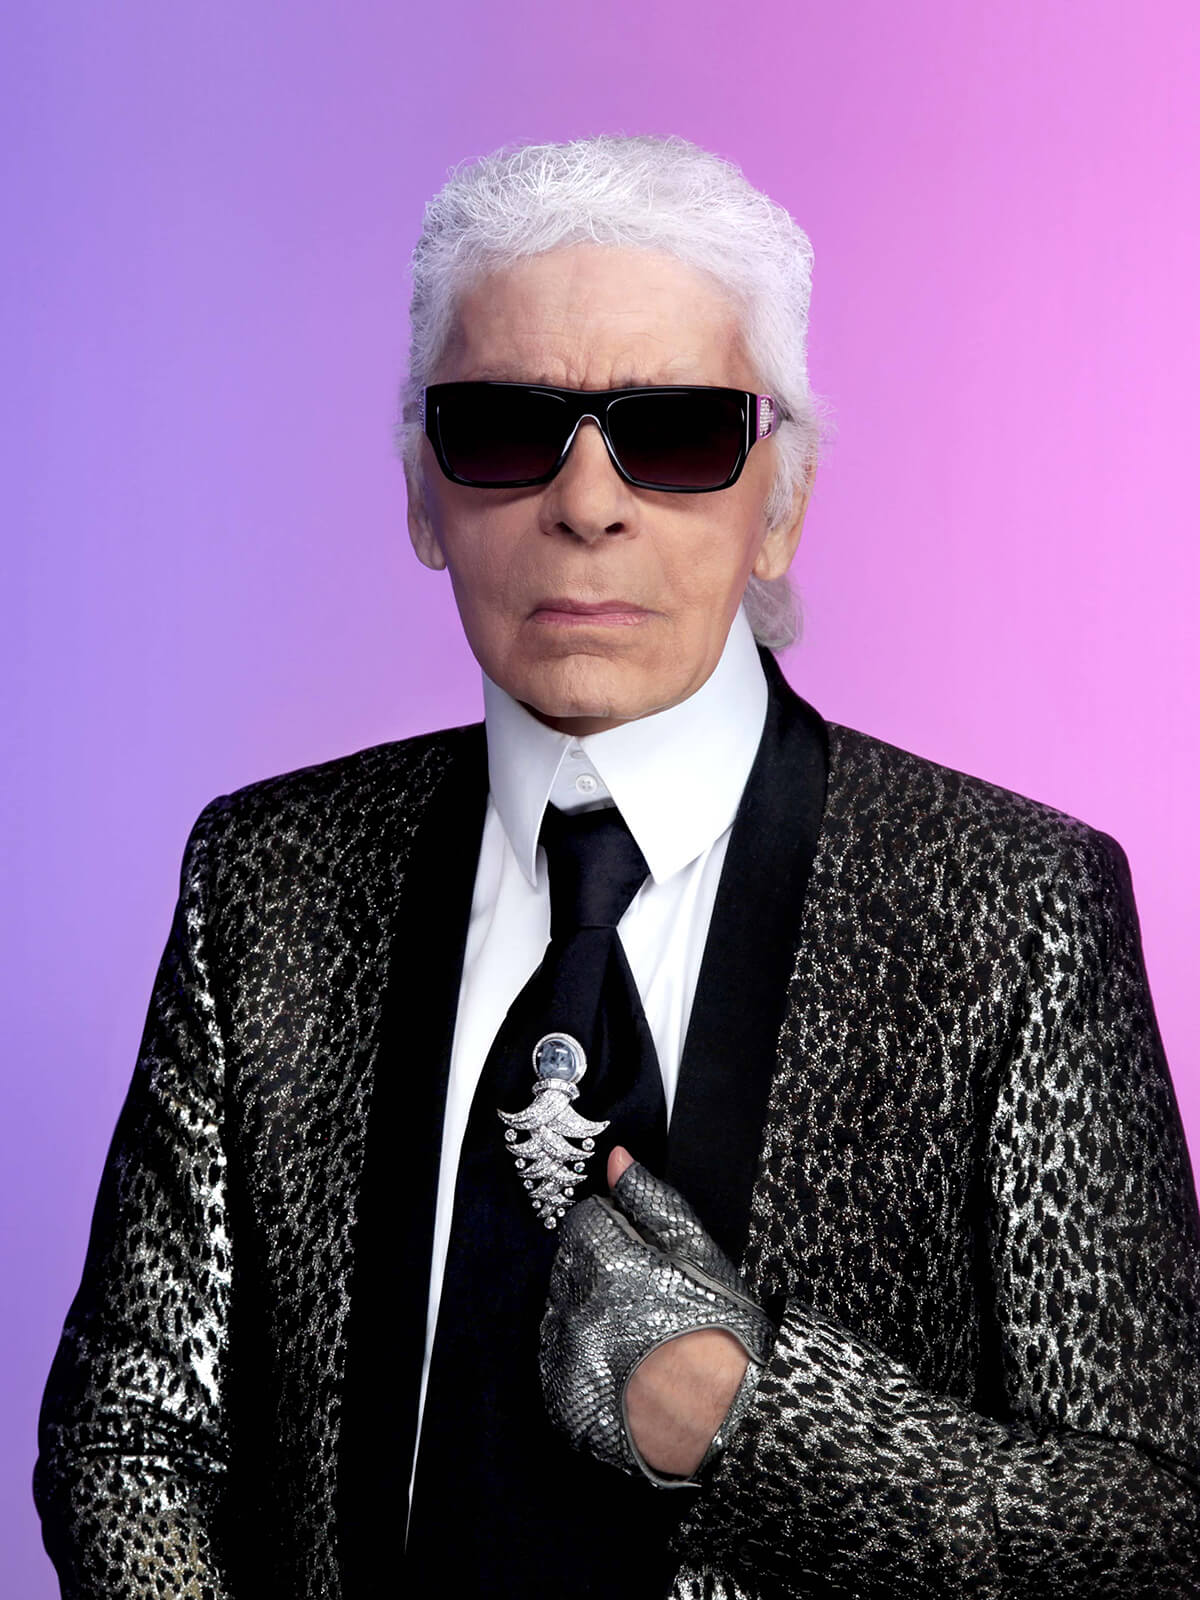 Karl Lagerfeld portraiture for AnOther Magazine by artist Rob Munday